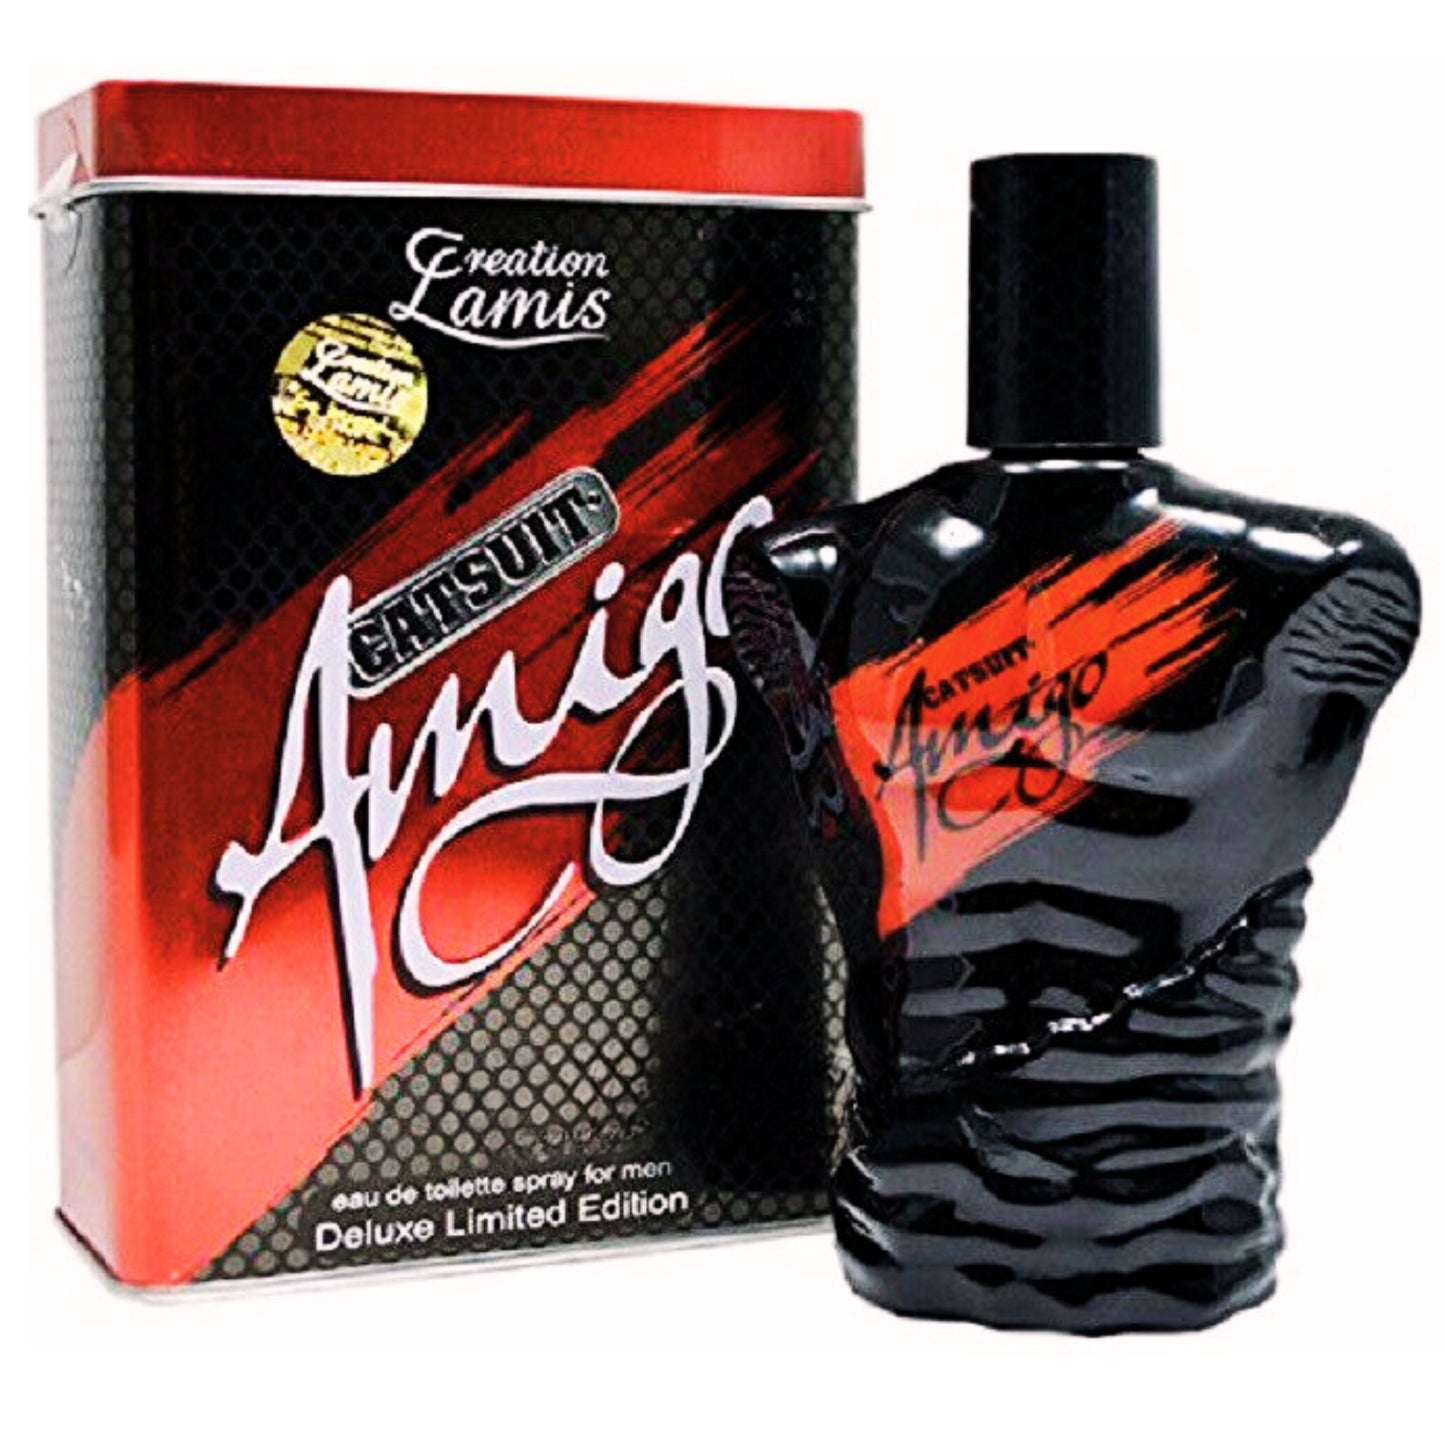 Catsuit Amigo DELUXE LIMITED EDITION by CREATION LAMIS 3.3 OZ / 100 ML EDT SPRAY